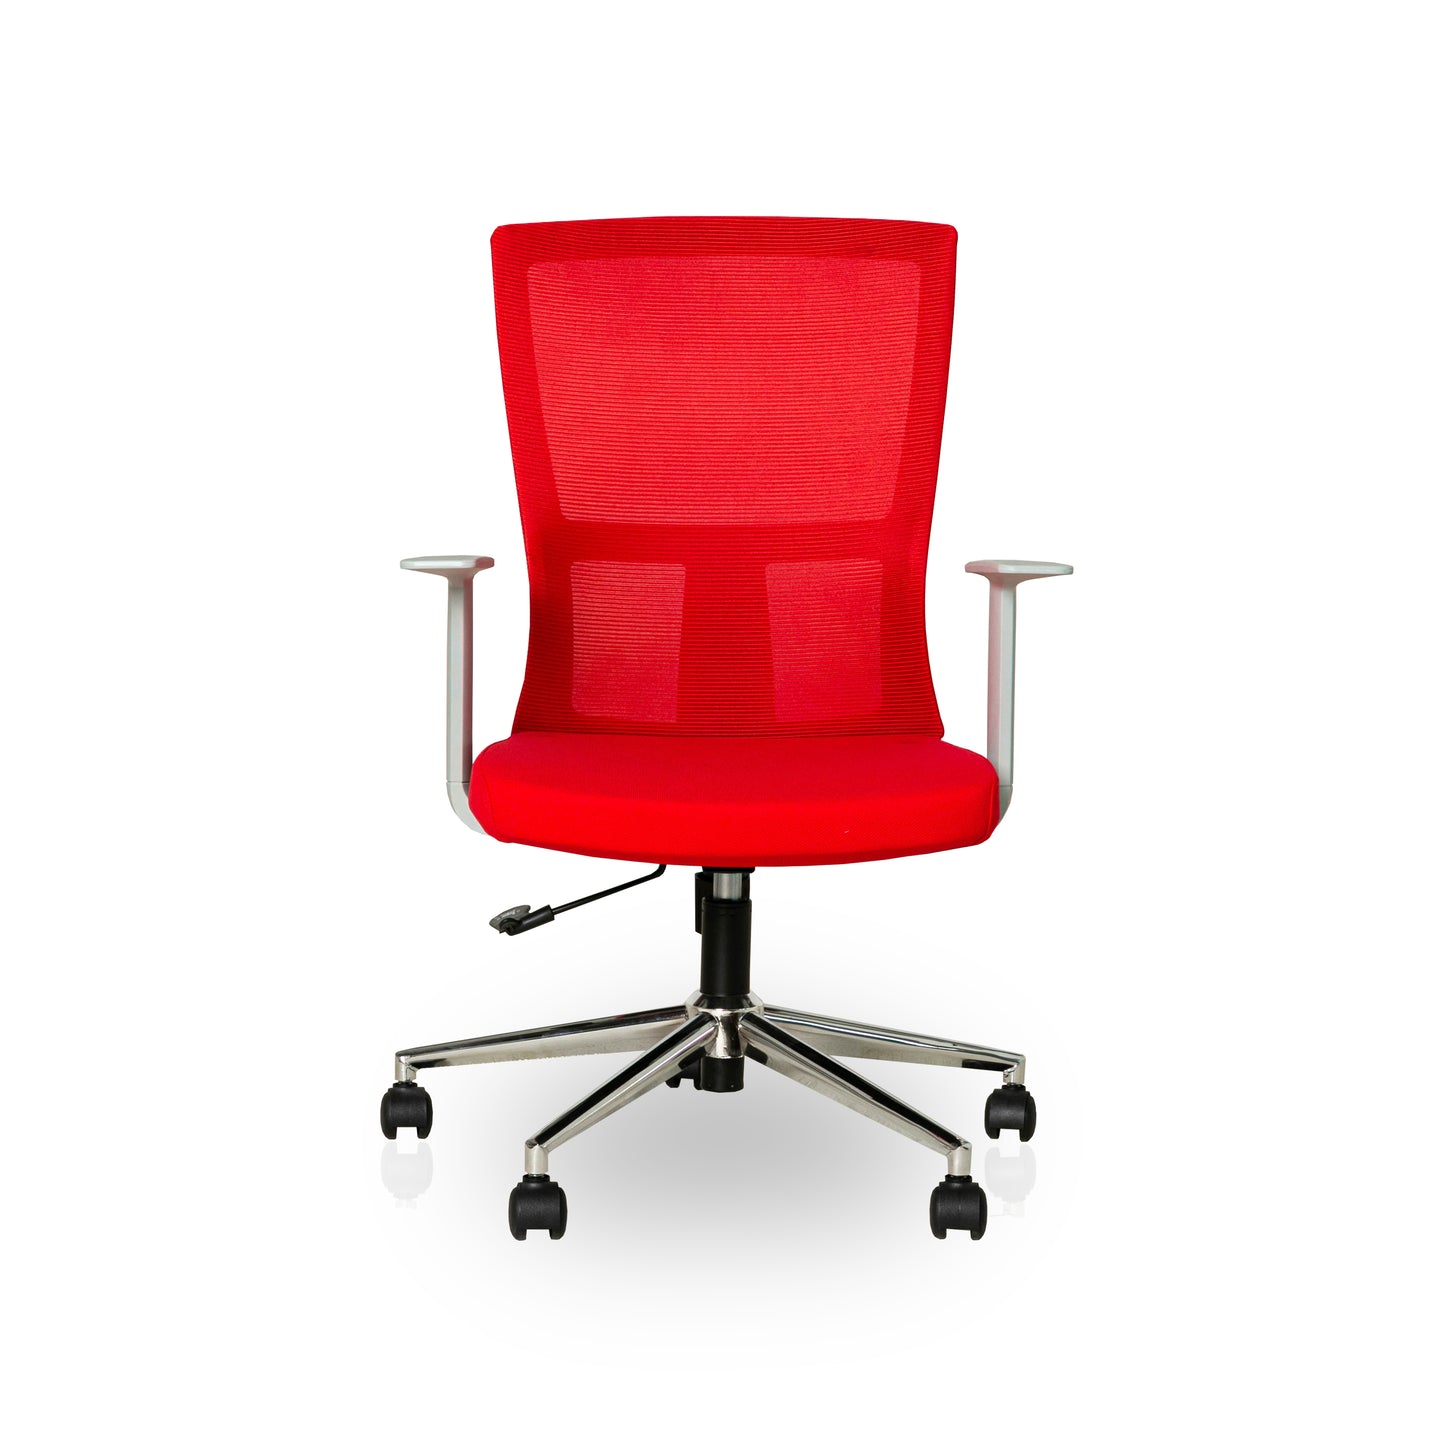 Orion Task Chair - ContractWorld Furniture